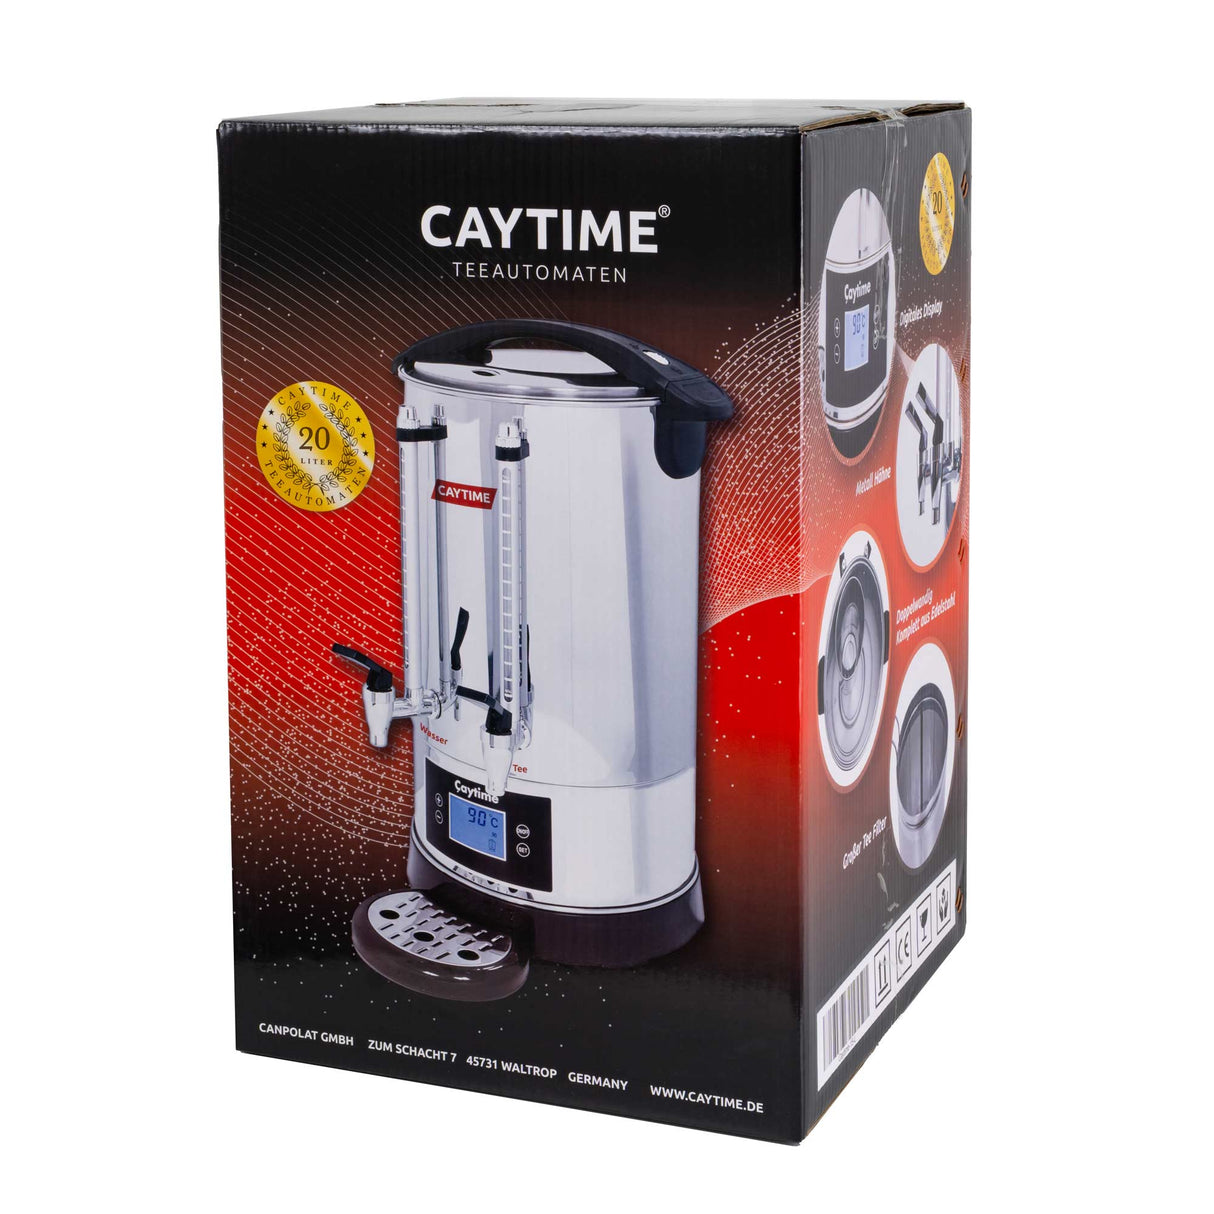 Caytime Teeautomat 20 Liter Digital Doppelwand Isolierung D20 Caytime - CPGASTRO